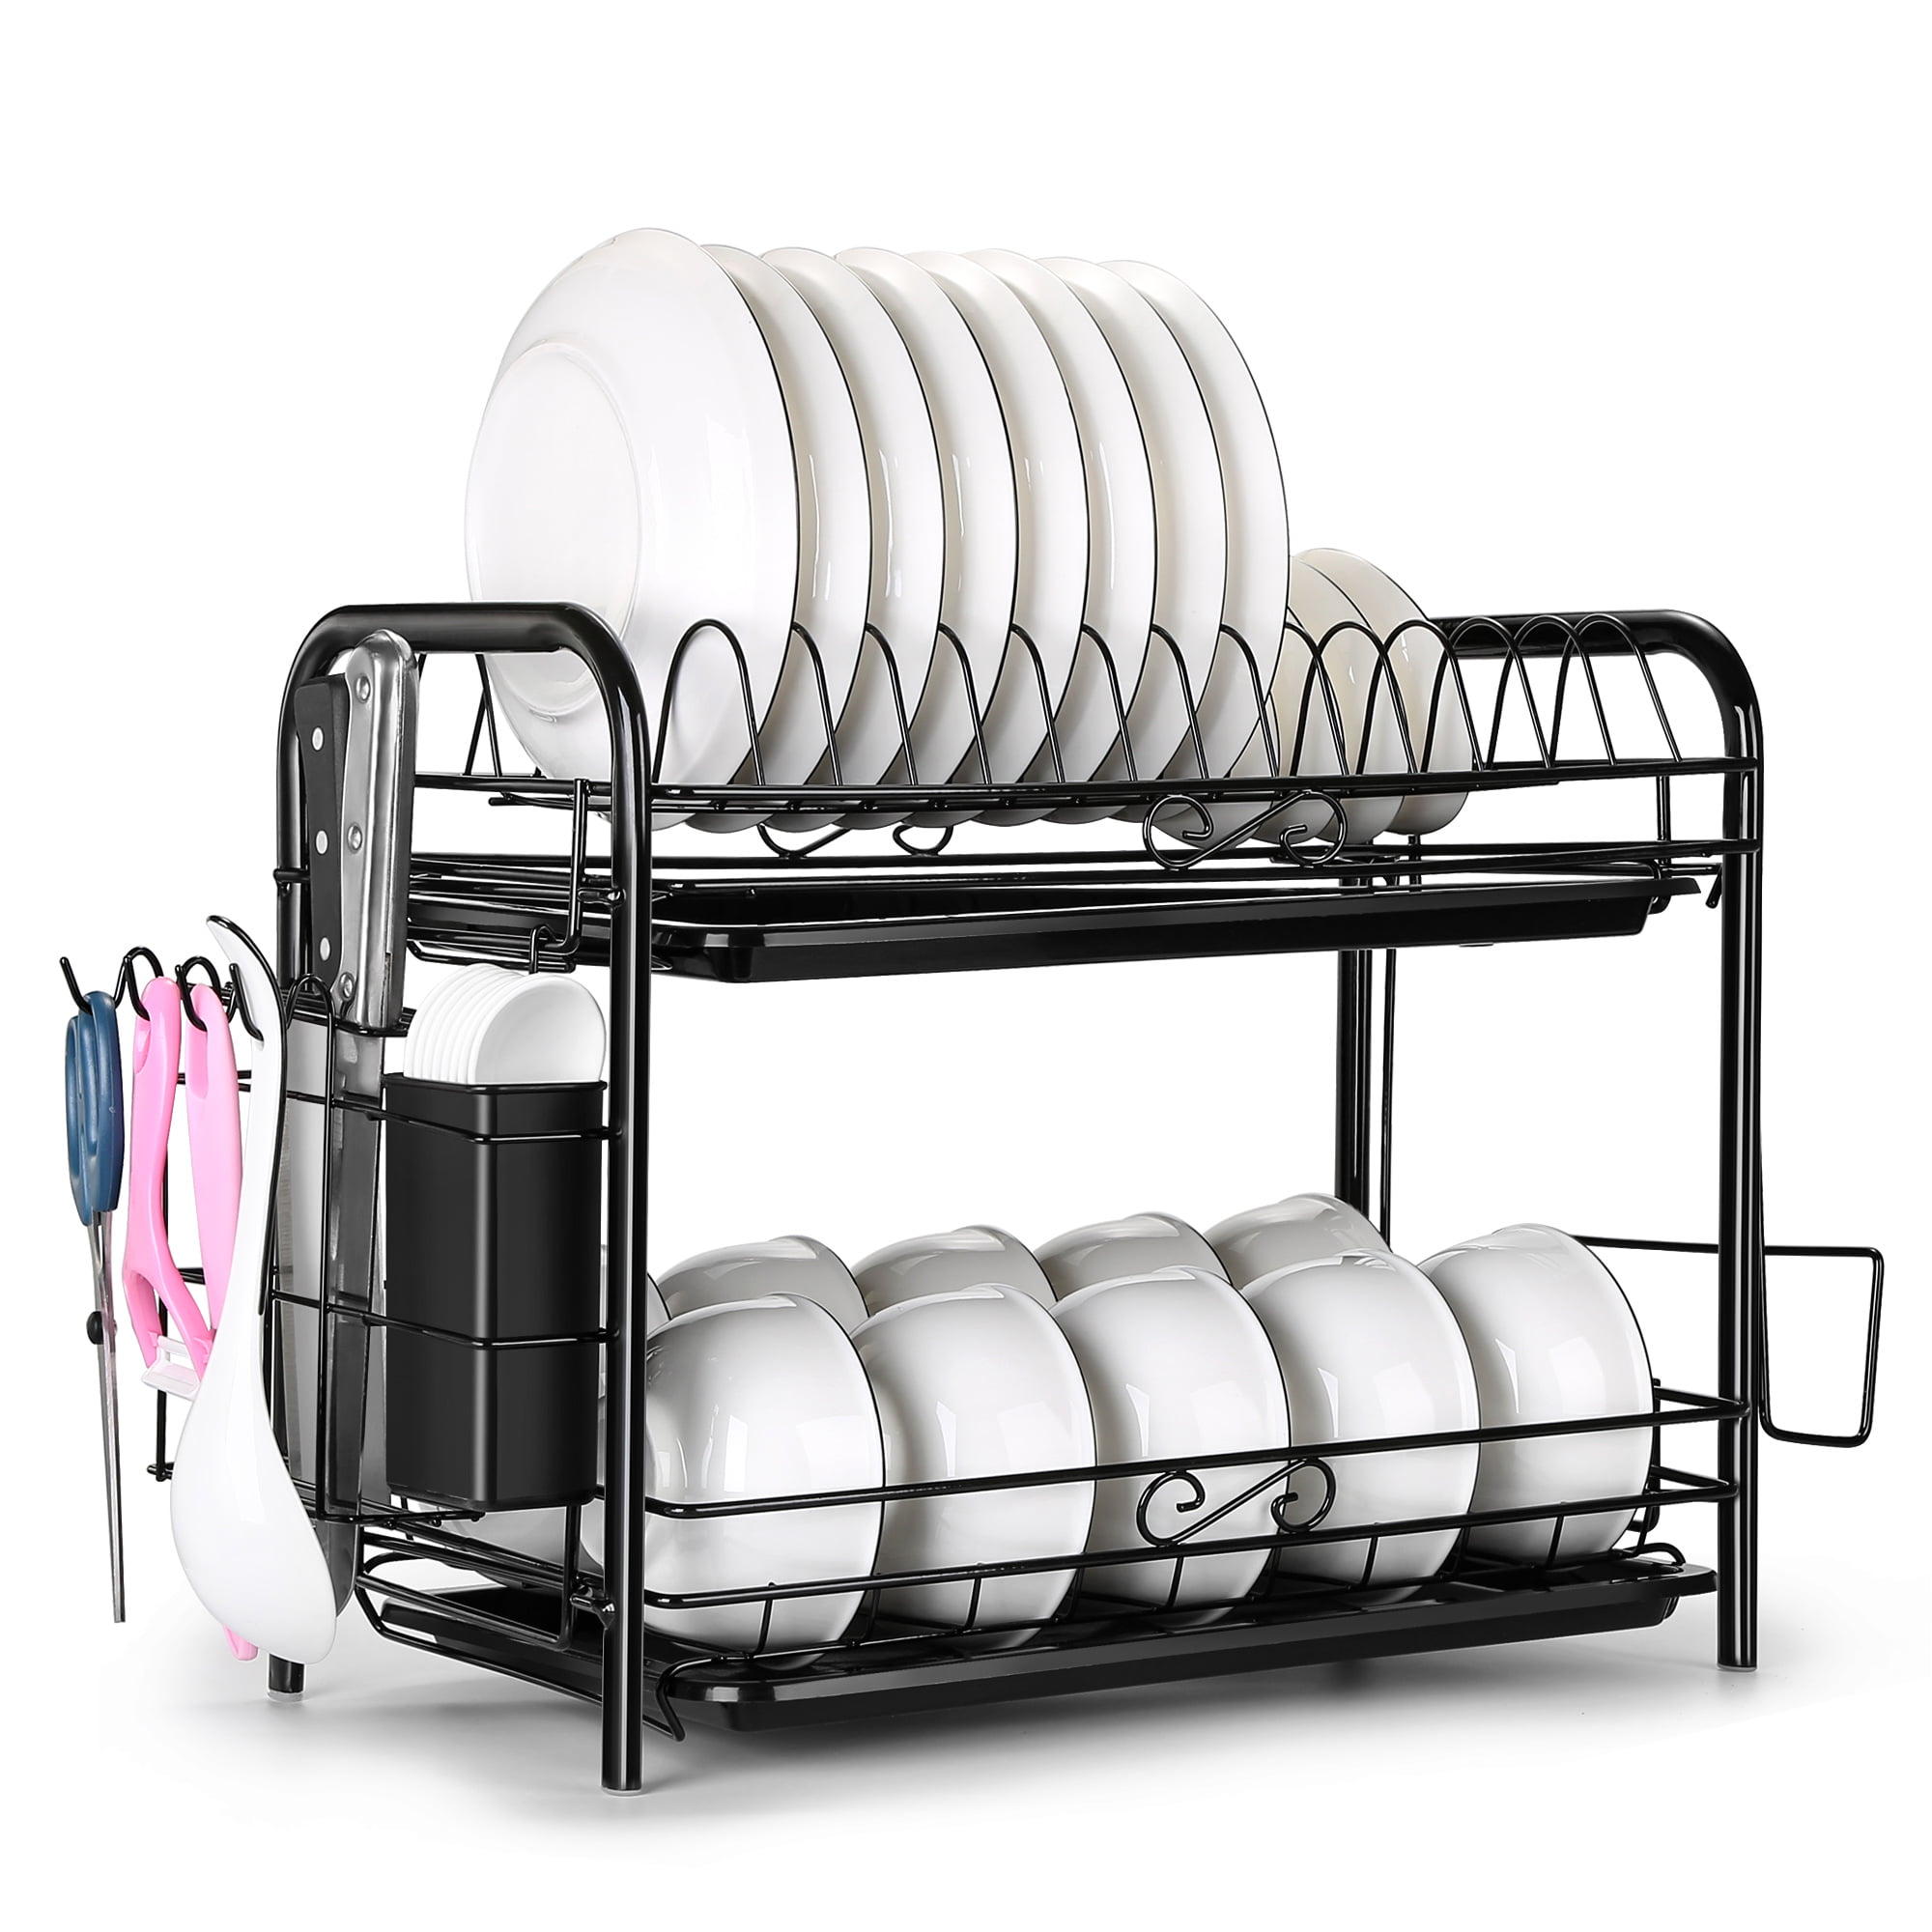 Dish Drying Rack, 2 Tier Chrome Dish Rack Over the sink, Kitchen Storage with cutting board and